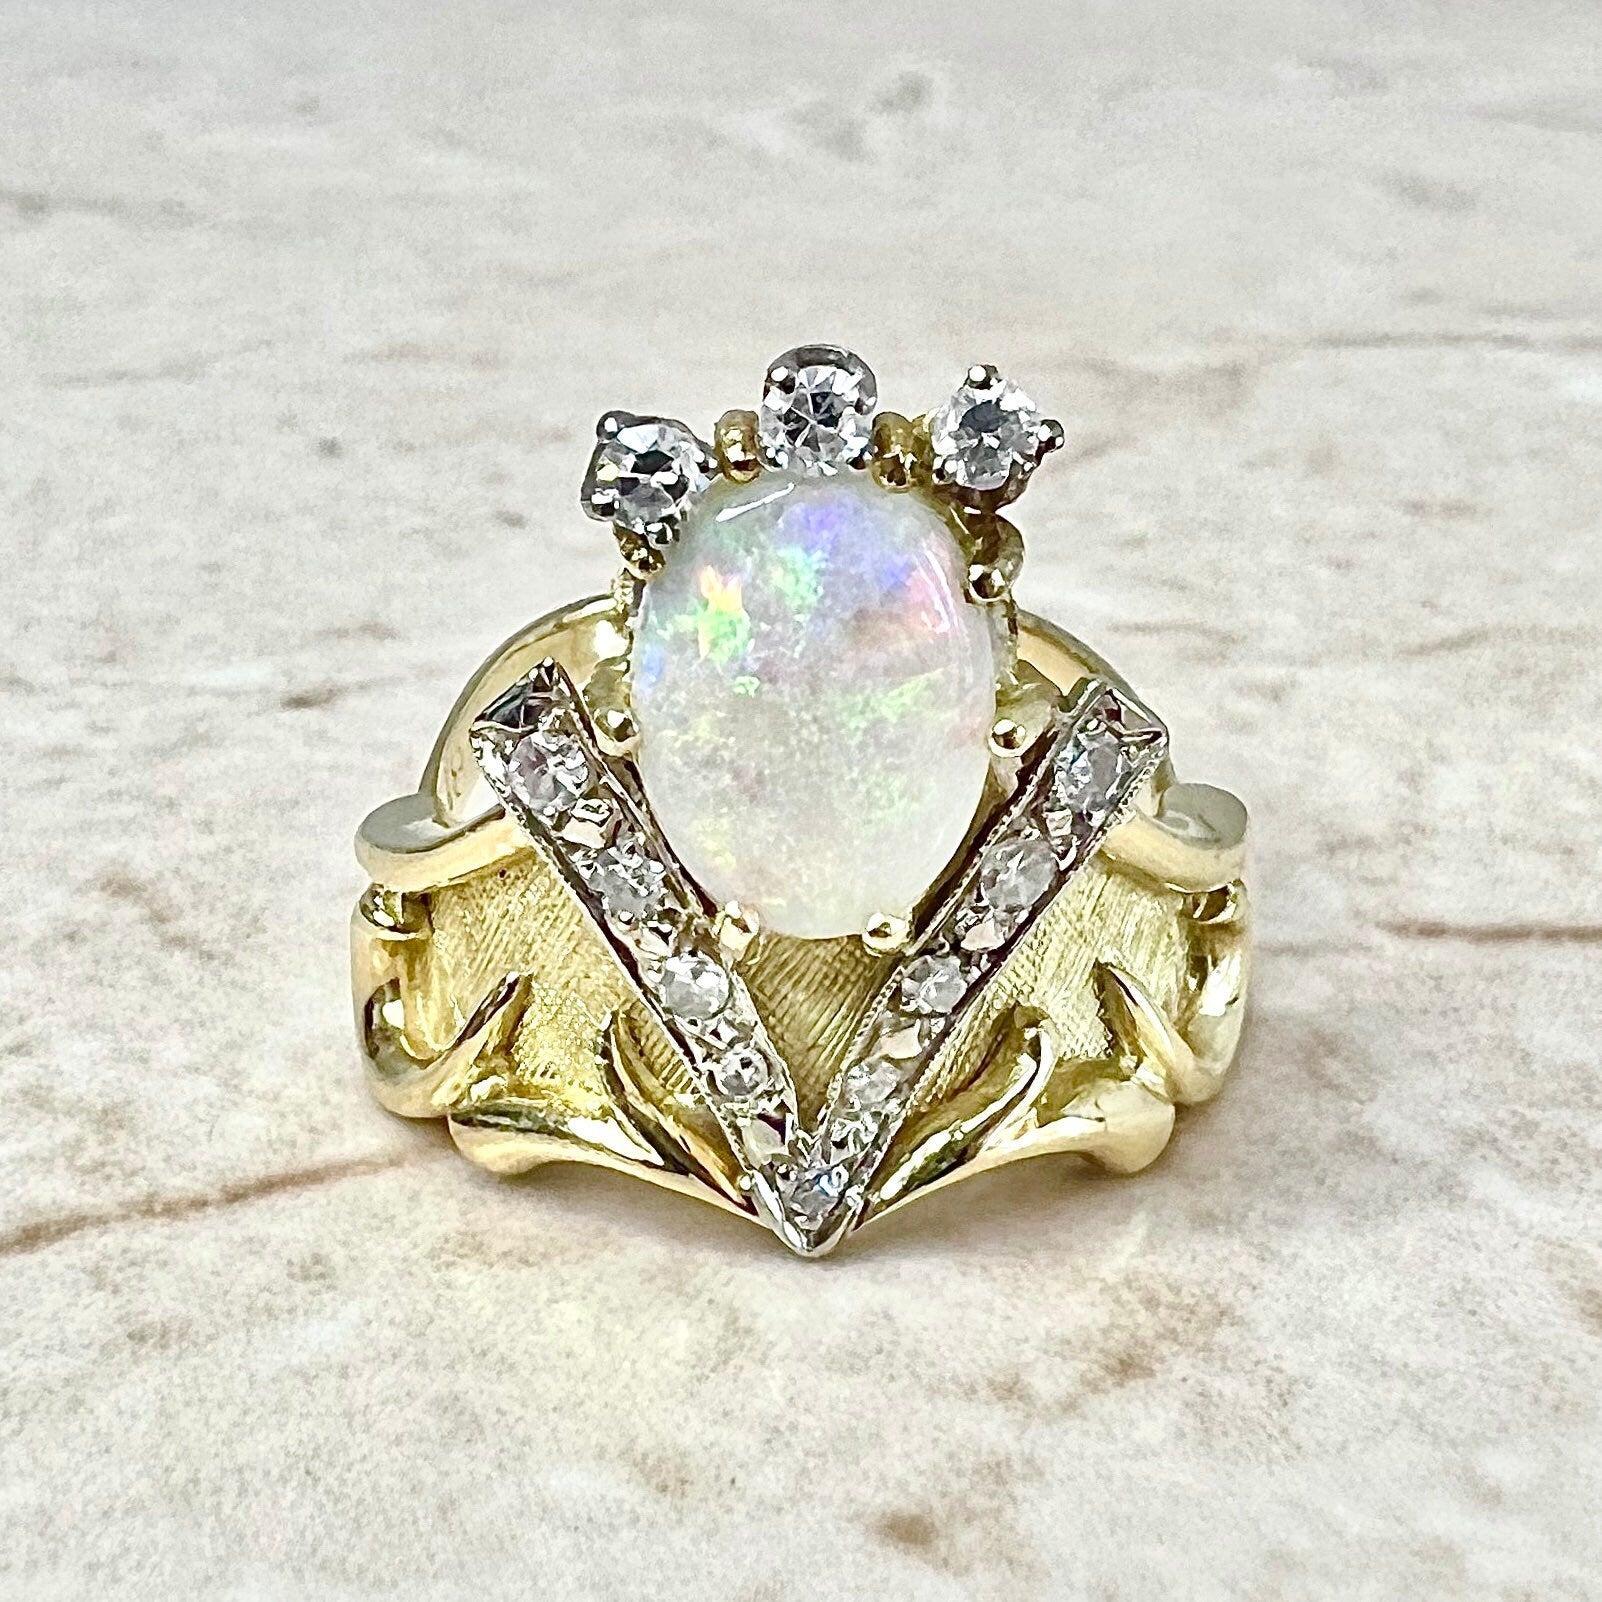 Antique Victorian Opal Diamond Cluster Ring Dated 1886 - Ruby Lane